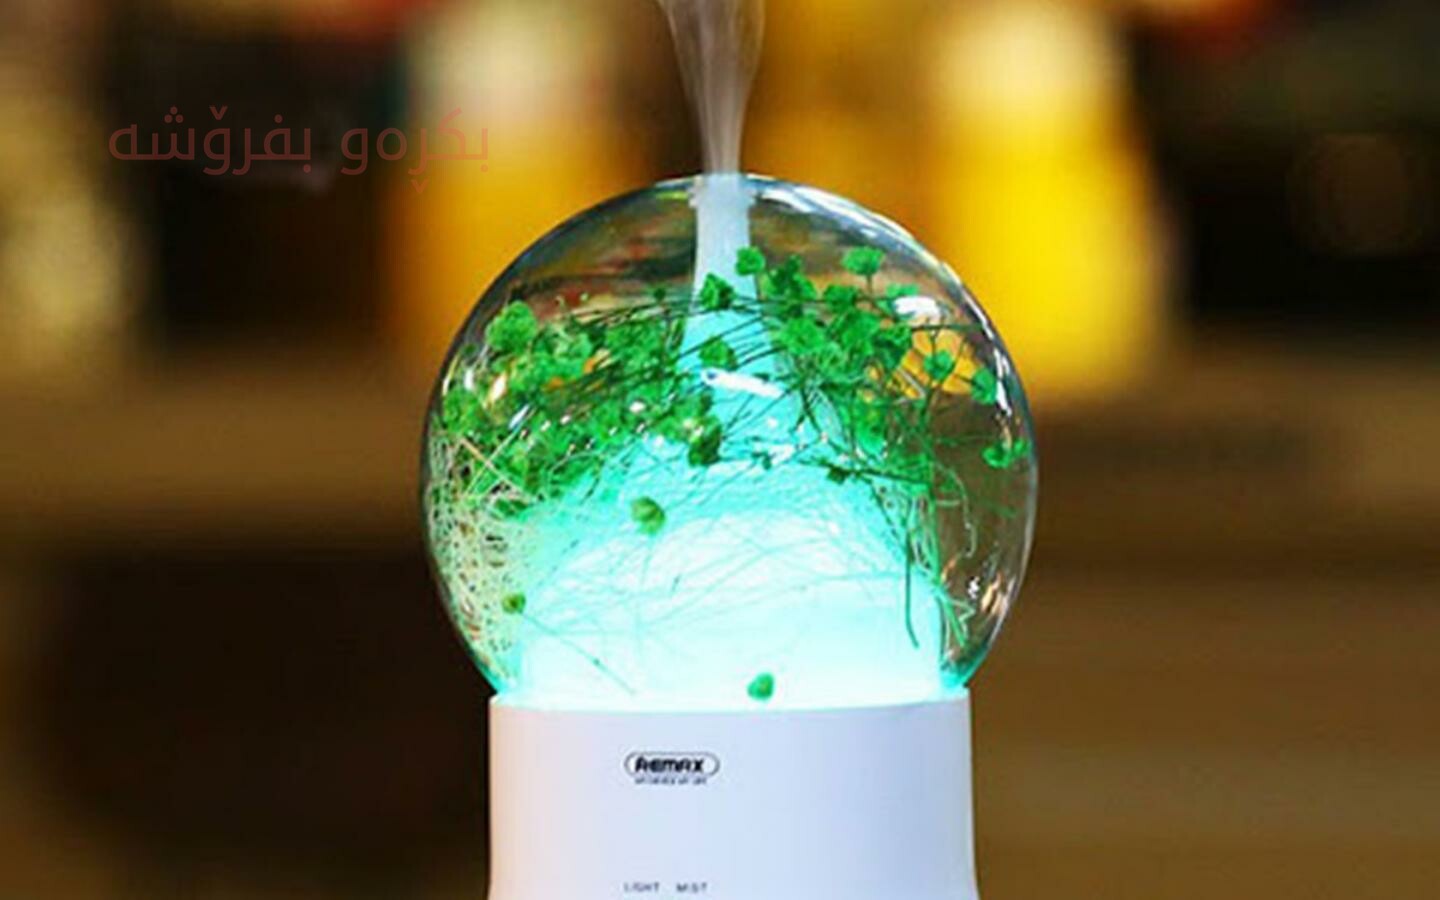 Remax purification humidifier flower fragrance lamp